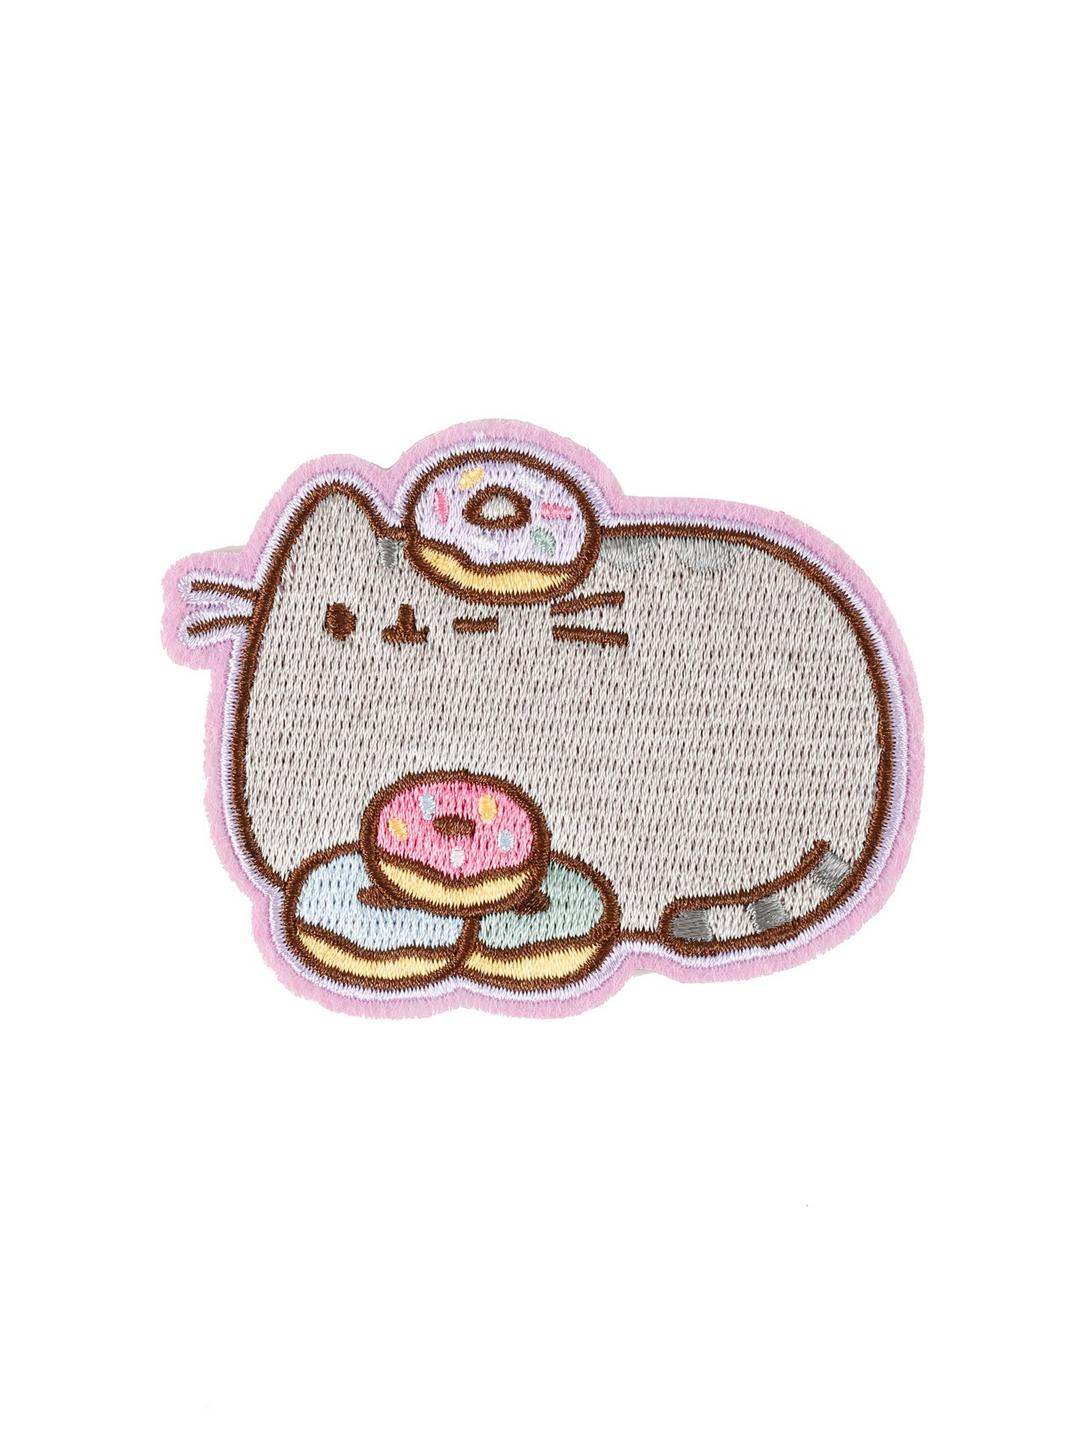 Pusheen Donuts Iron-On Patch, , hi-res